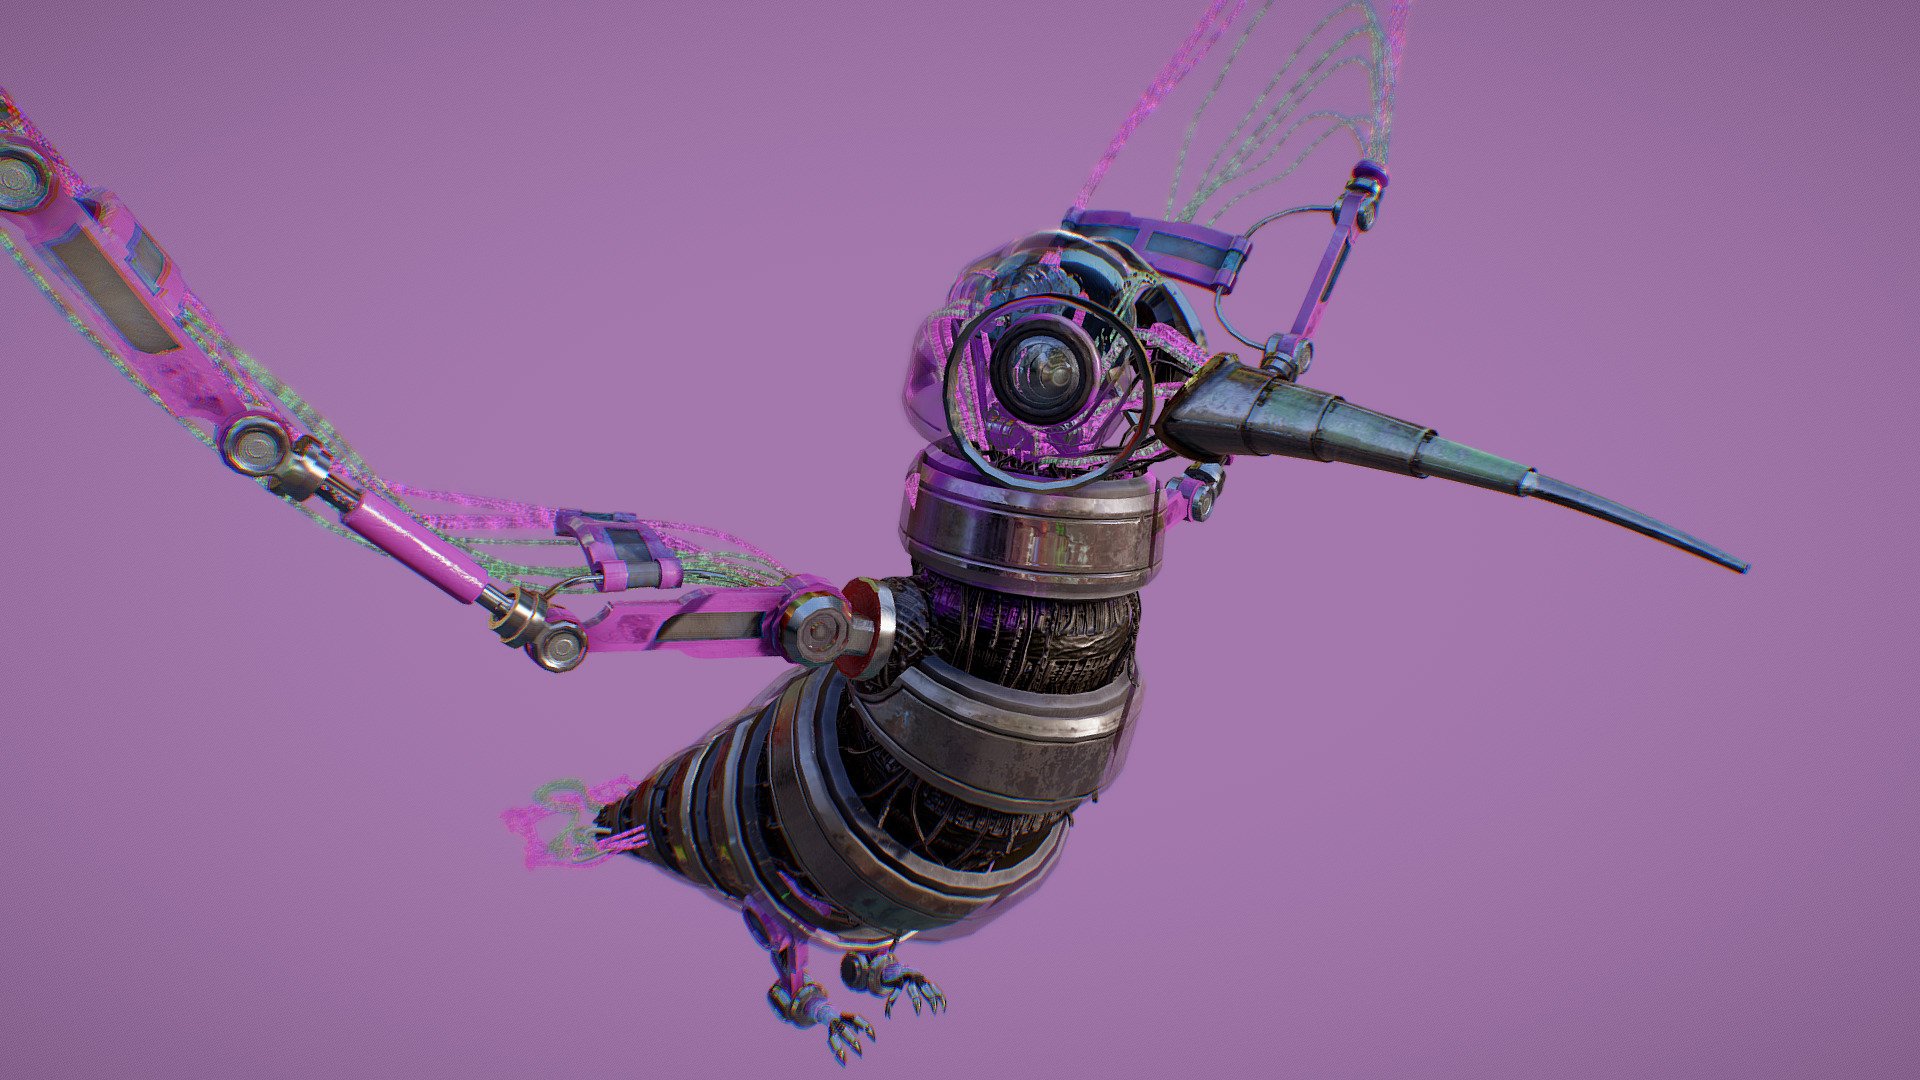 A pet for everyone from the year 2077!

Modelled and animated in Blender and textured in SubstancePainter!
More pictures you can find here: https://www.artstation.com/artwork/68XZPn - Hummingbird mech - 3D model by Tom Breuer (@TomBreuer) 3d model